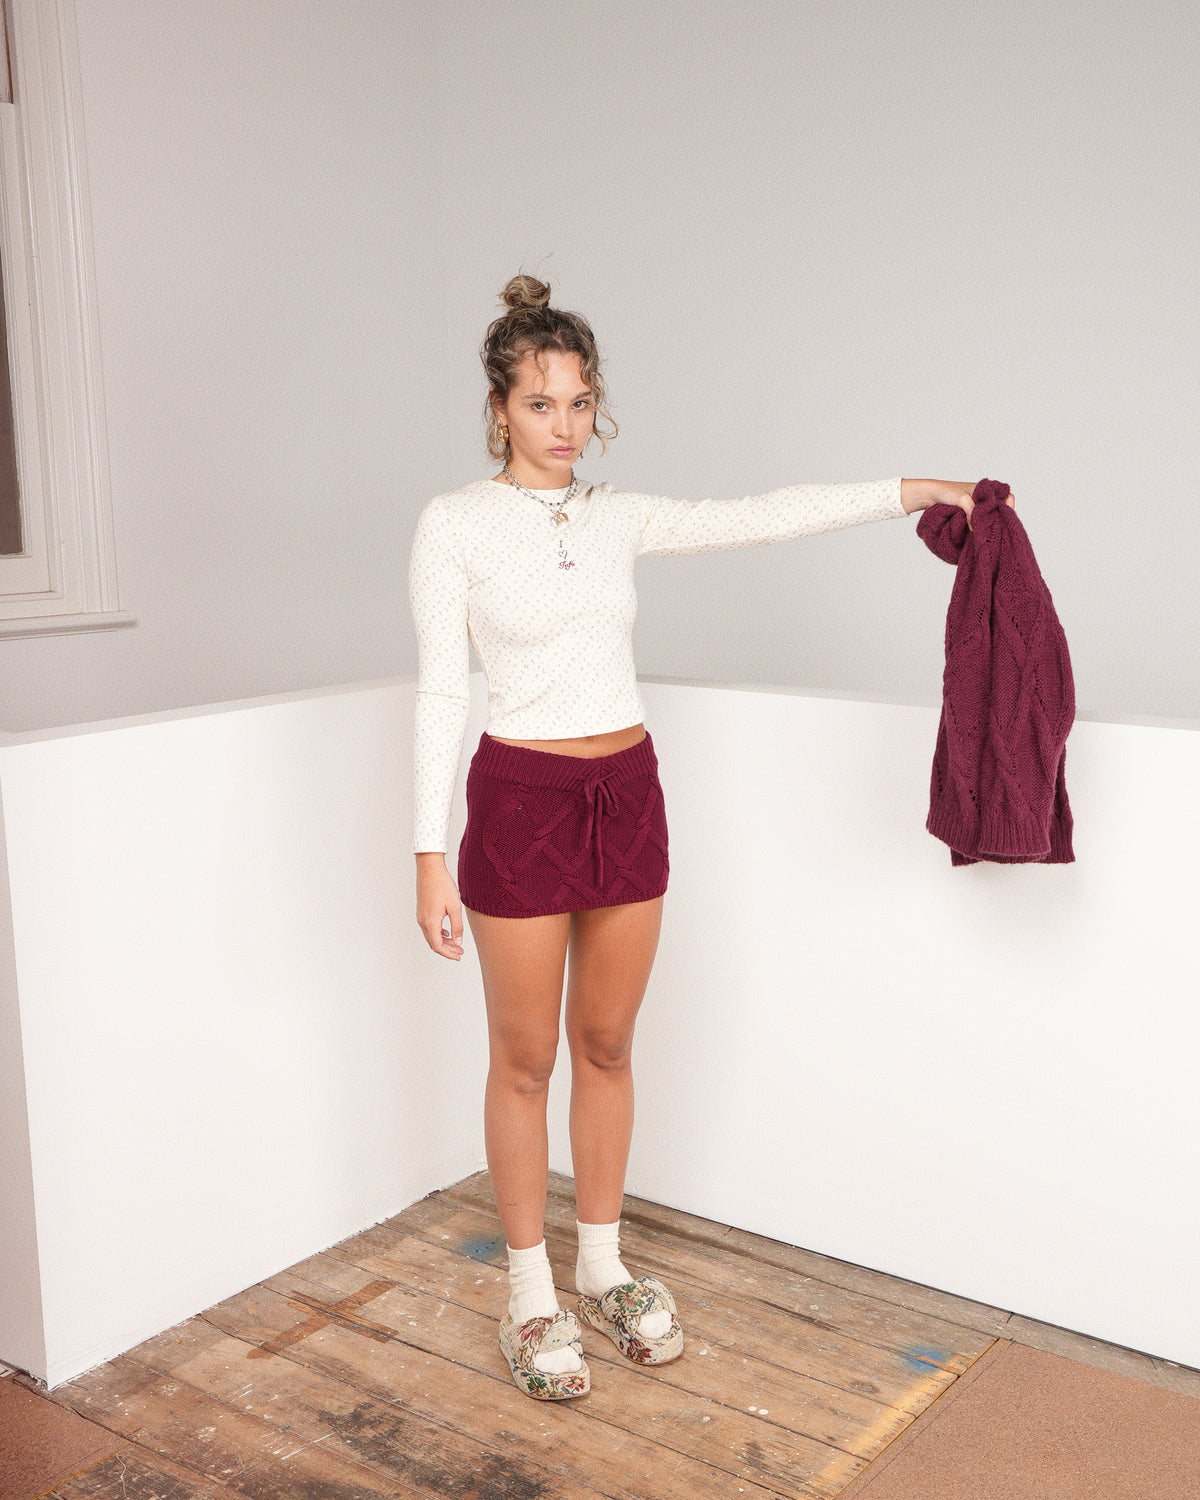 Cable Knit Recycled Cotton Skirt - Wine